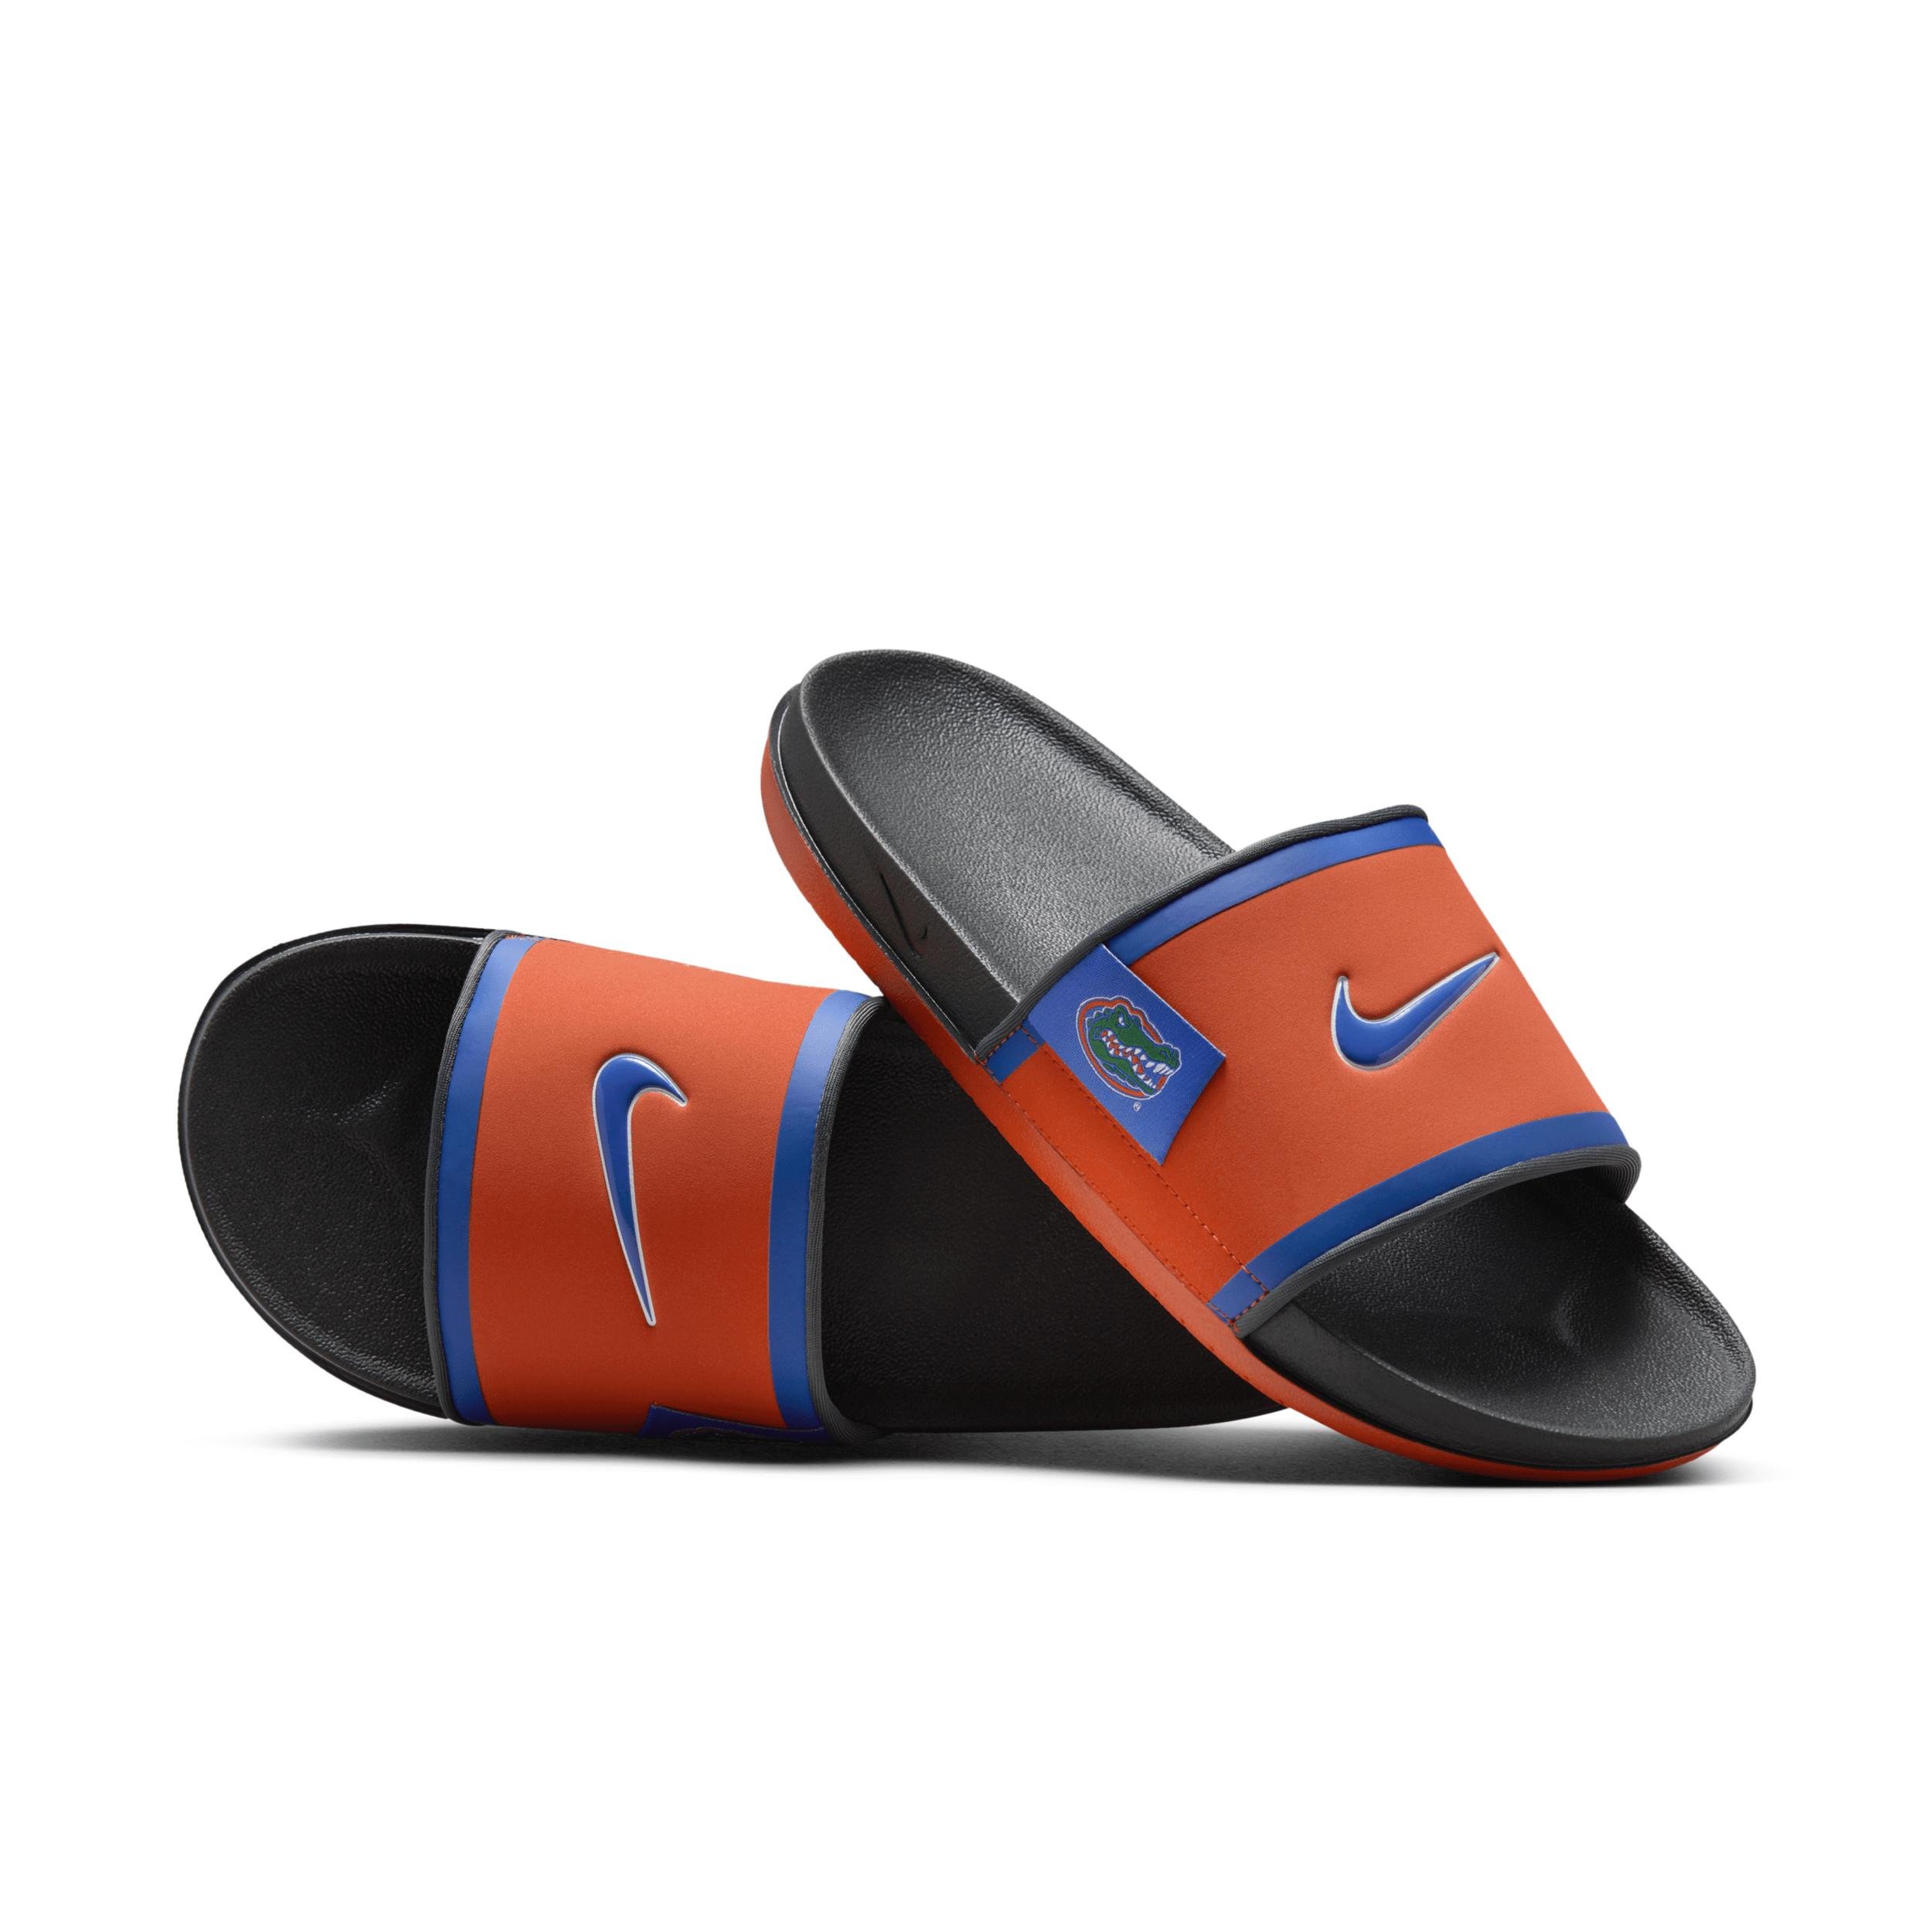 Nike Men's College Offcourt (Florida ) Slides by NIKE